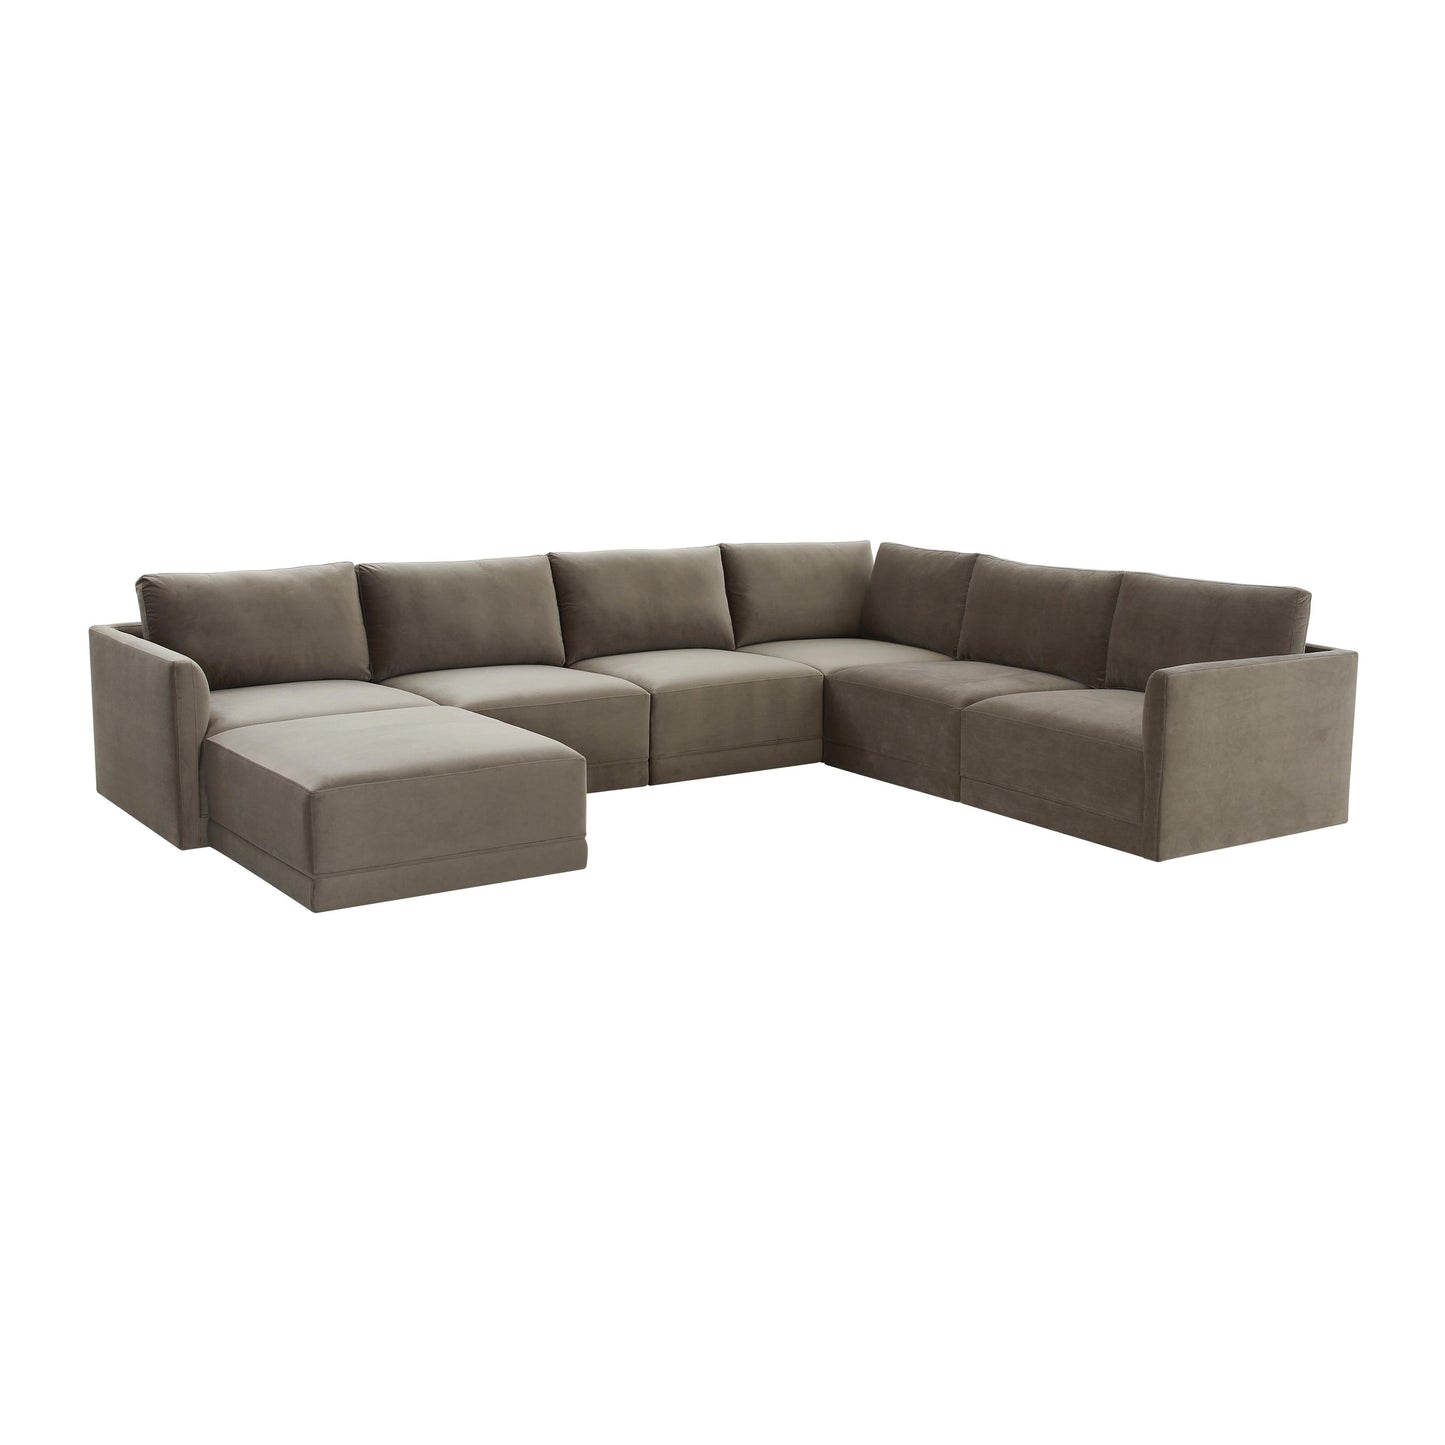 Tov Furniture Willow Taupe Modular Large Chaise Sectional